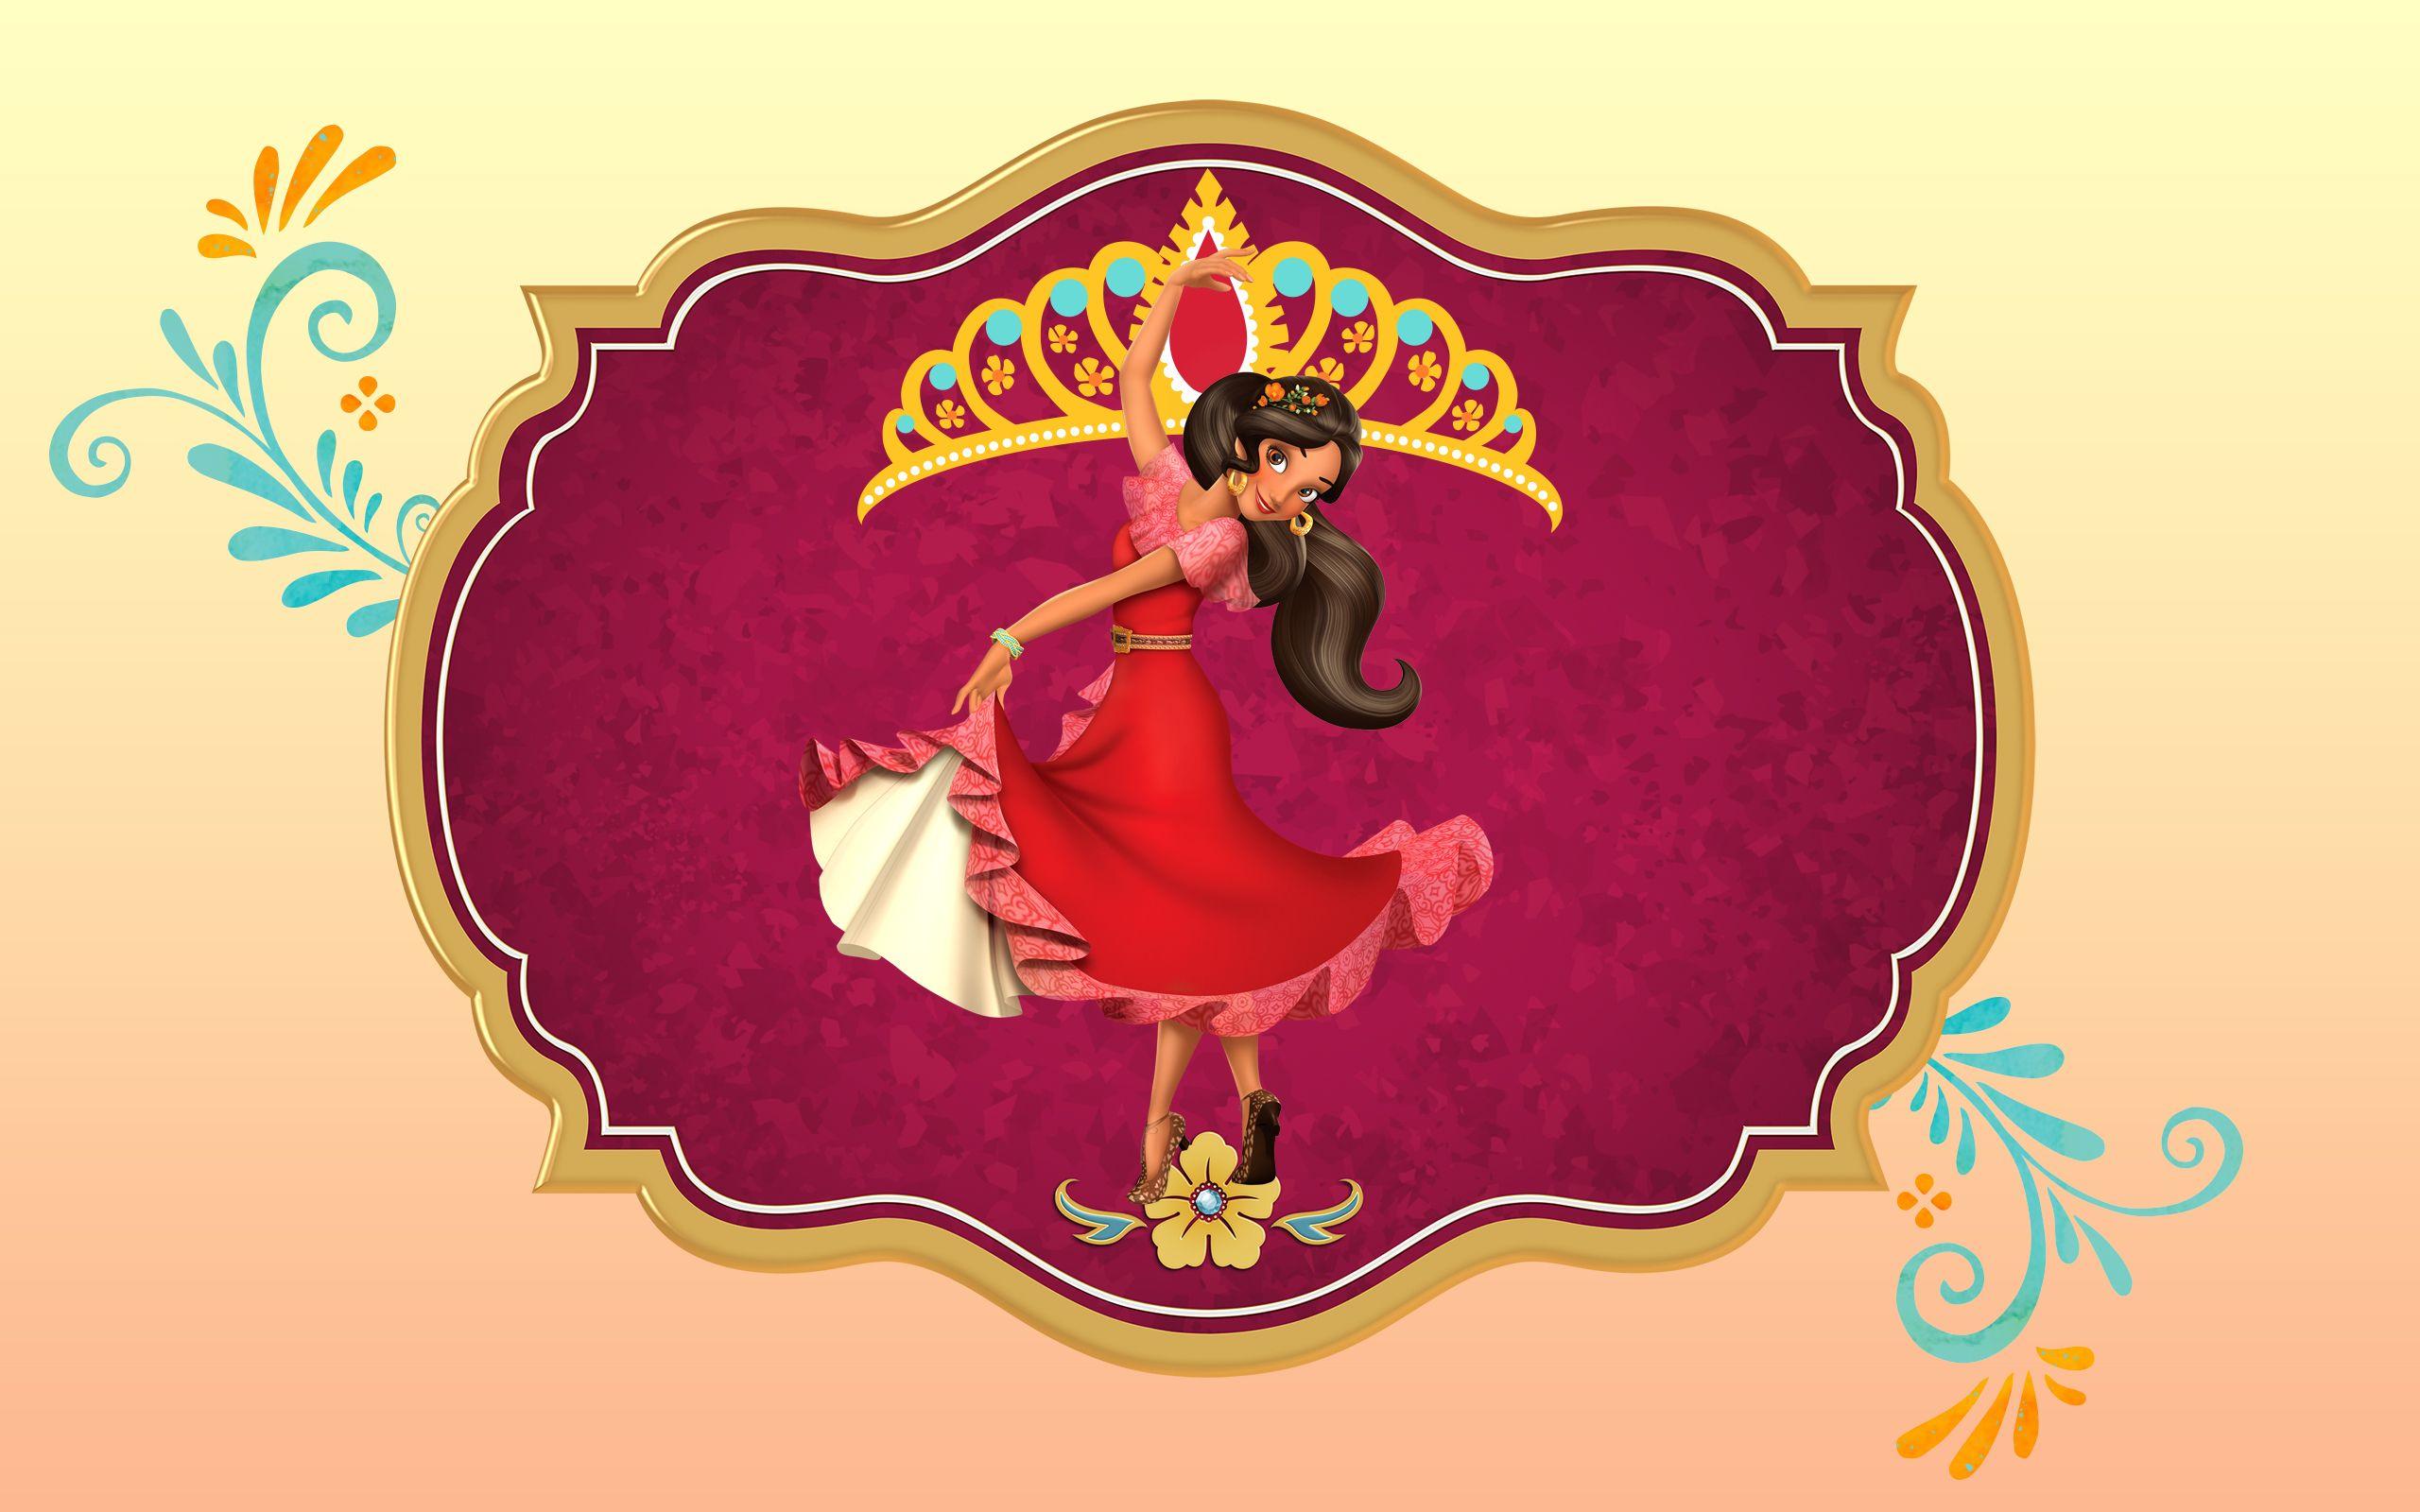 Elena of Avalor: Big wallpaper with main characters